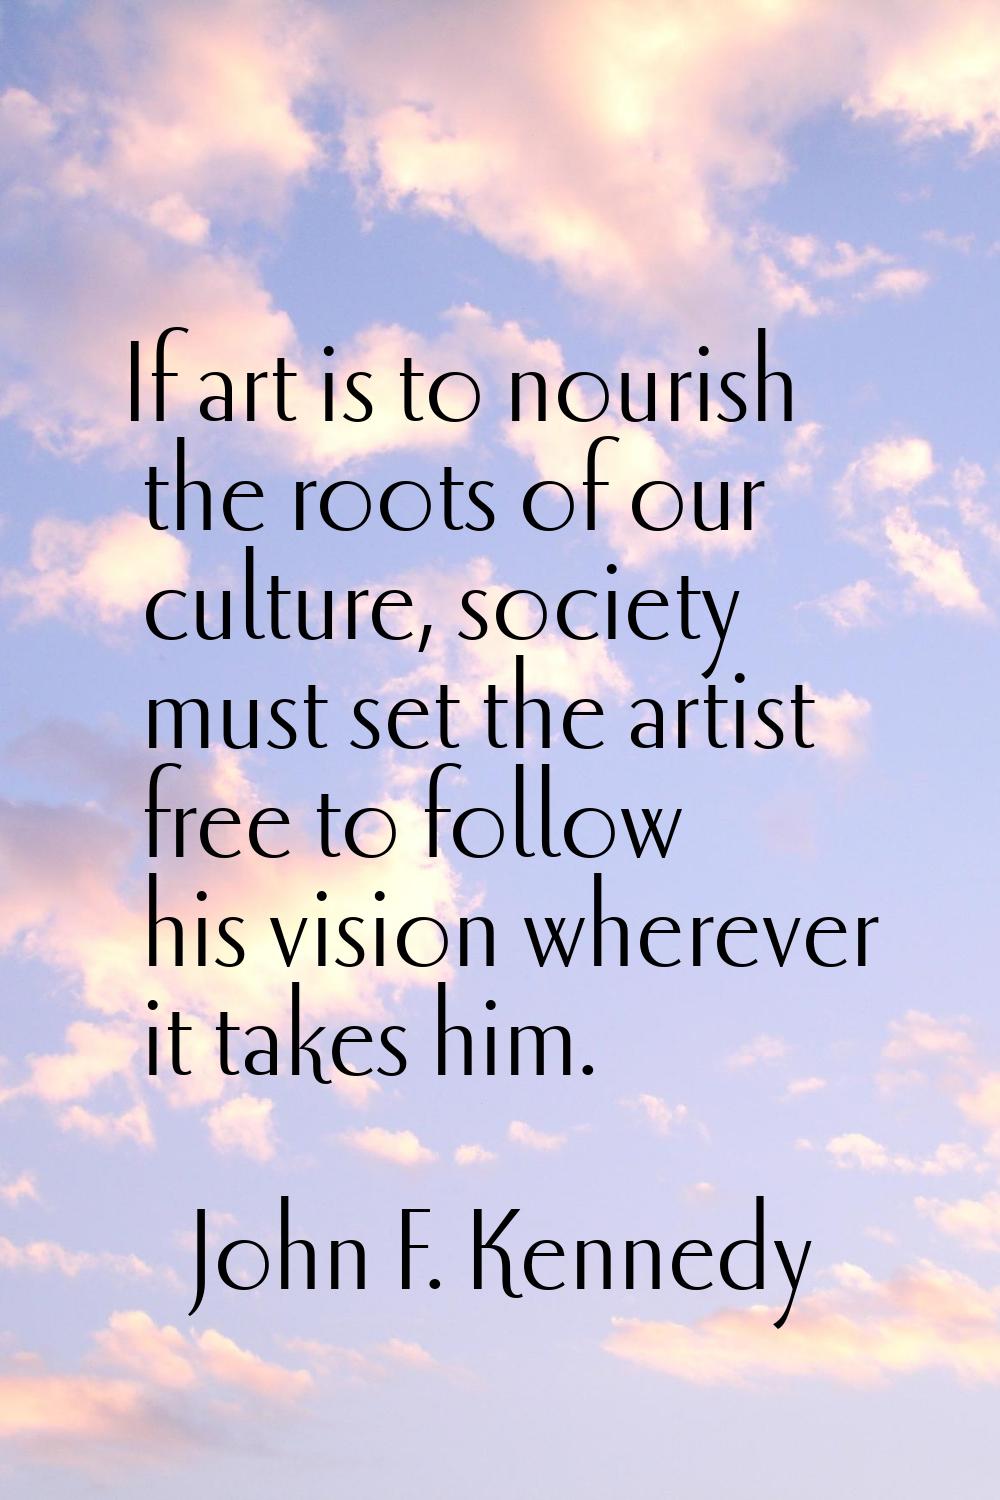 If art is to nourish the roots of our culture, society must set the artist free to follow his visio